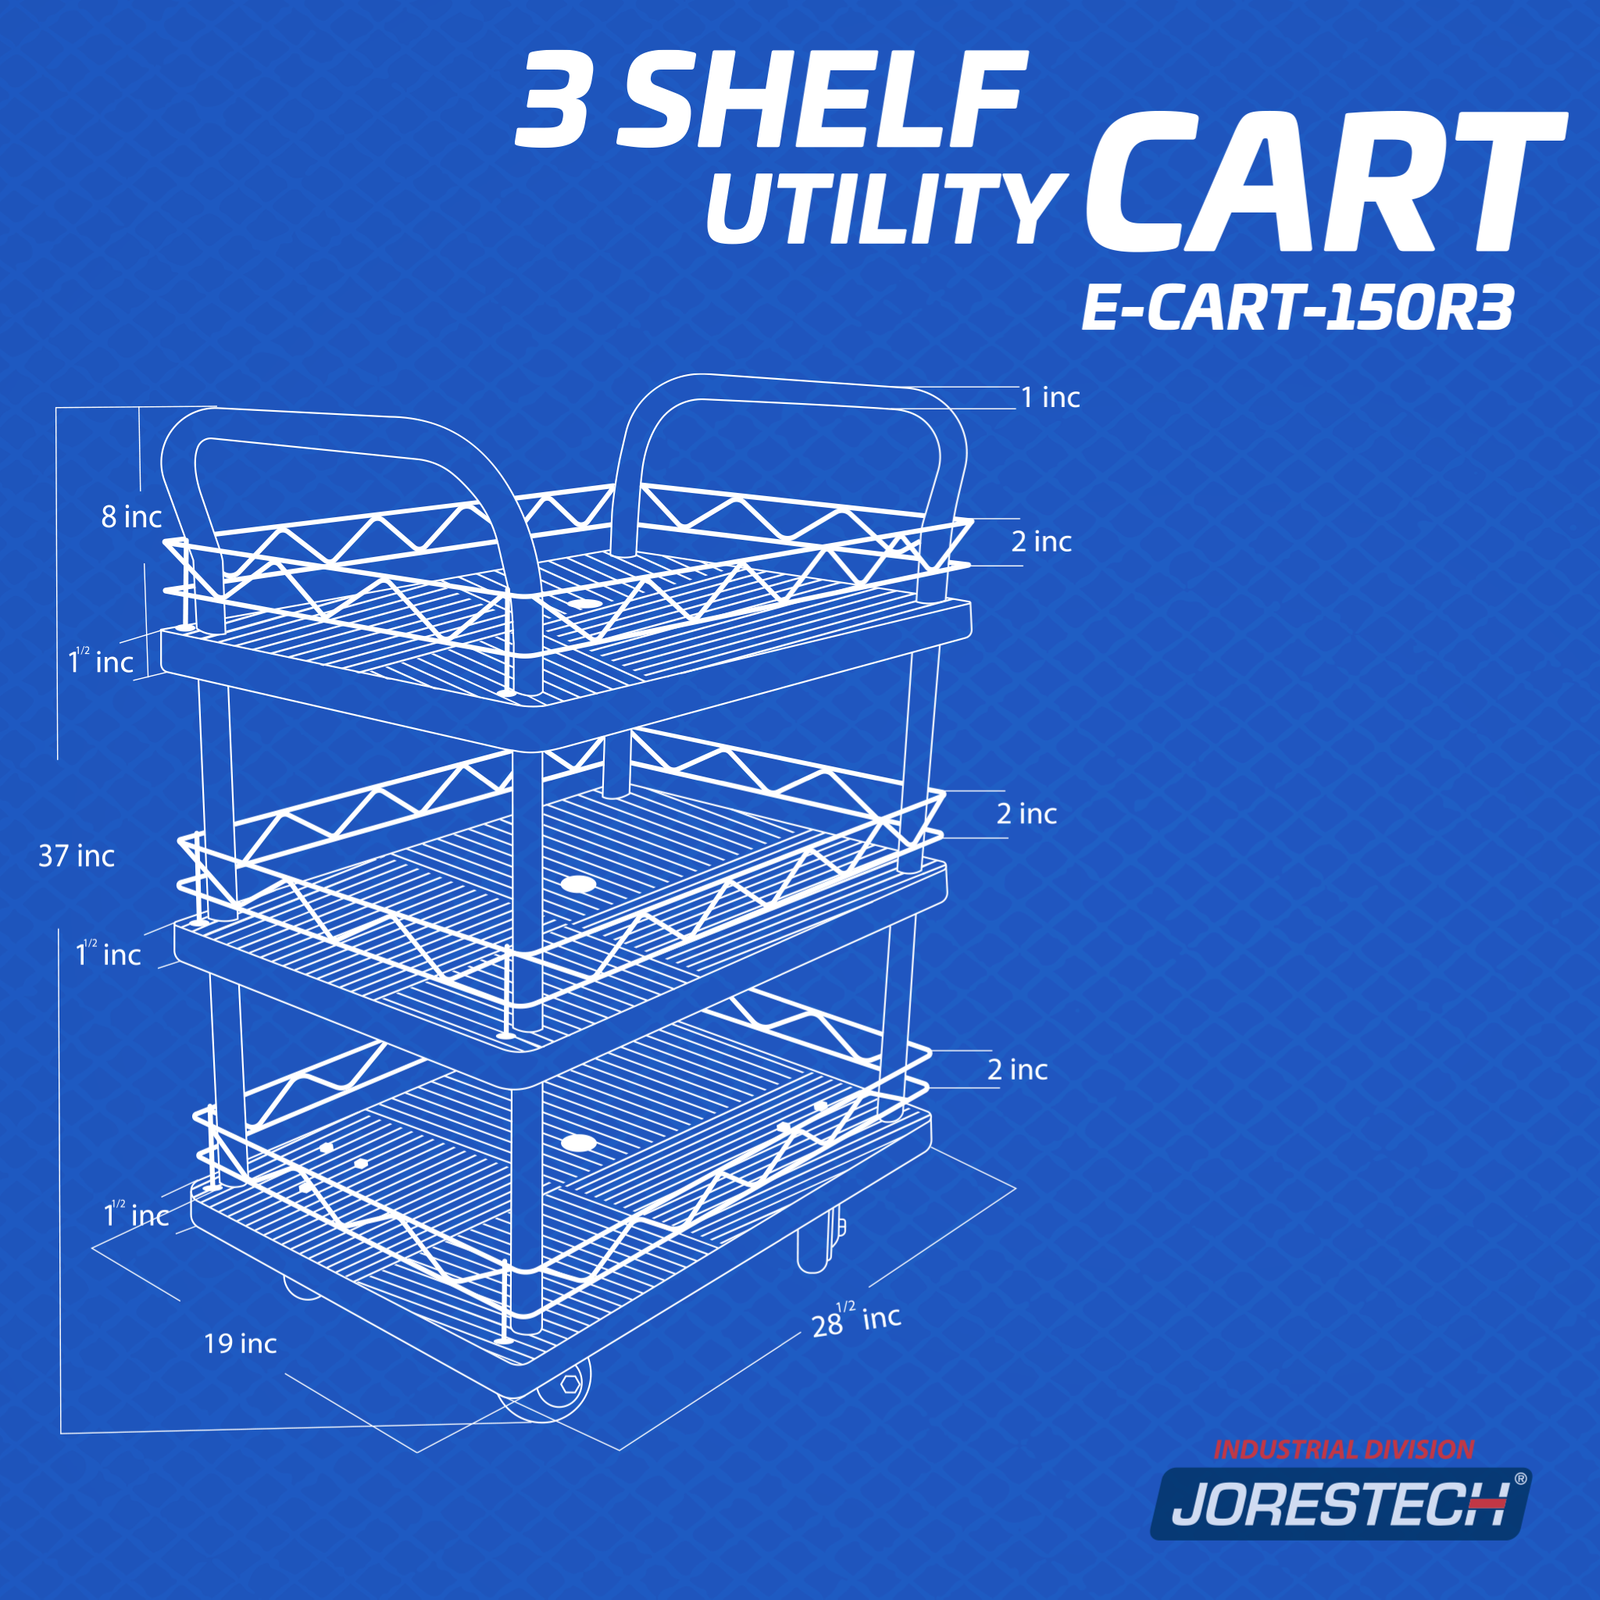 Graphic of the JORES TECHNOLOGIES® 3 shelf utility cart showing the measurements of the platforms of the cart, which are 28 x 19 inches